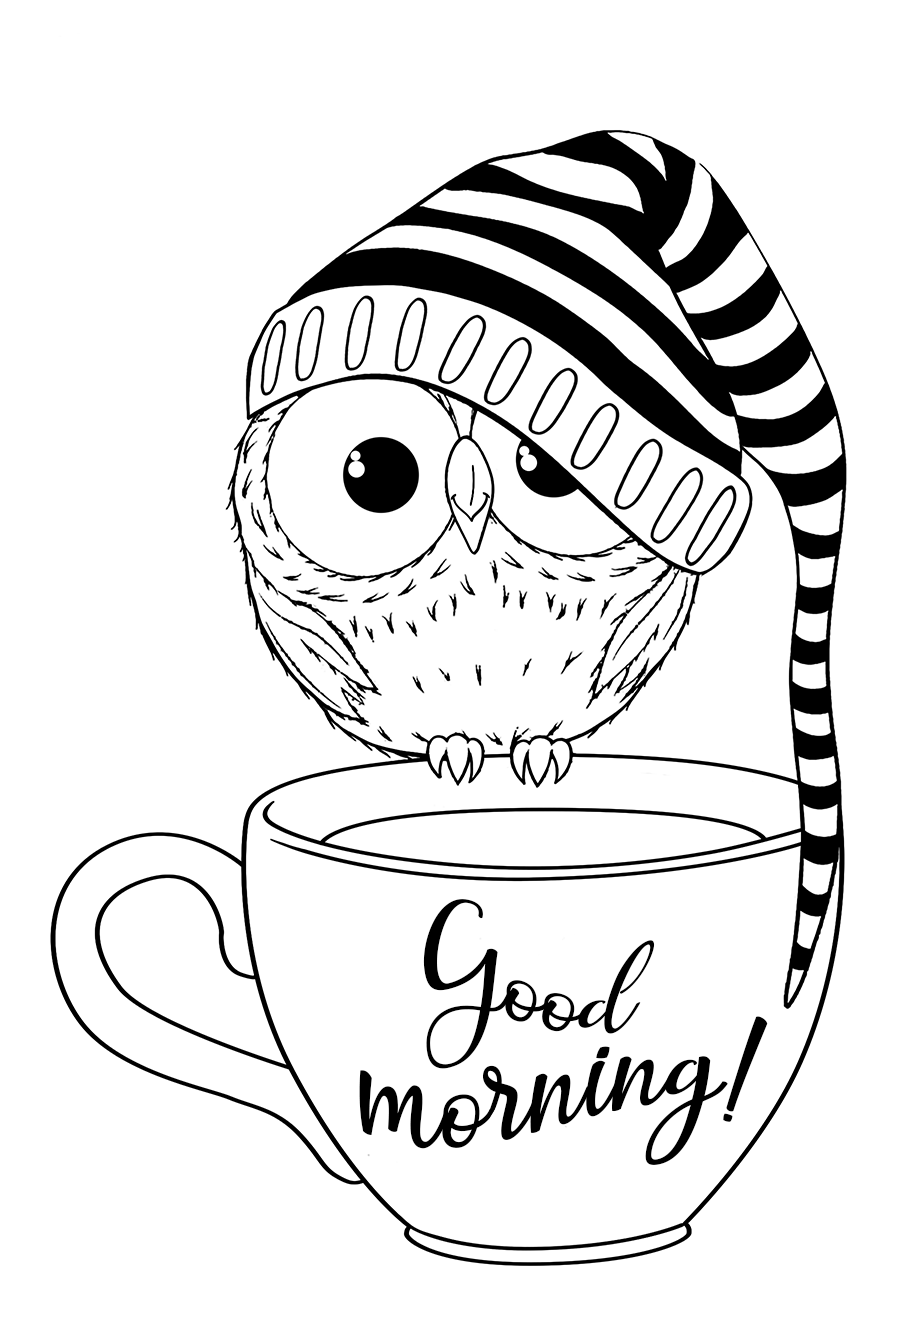 Good Morning Coloring Pages with Cup